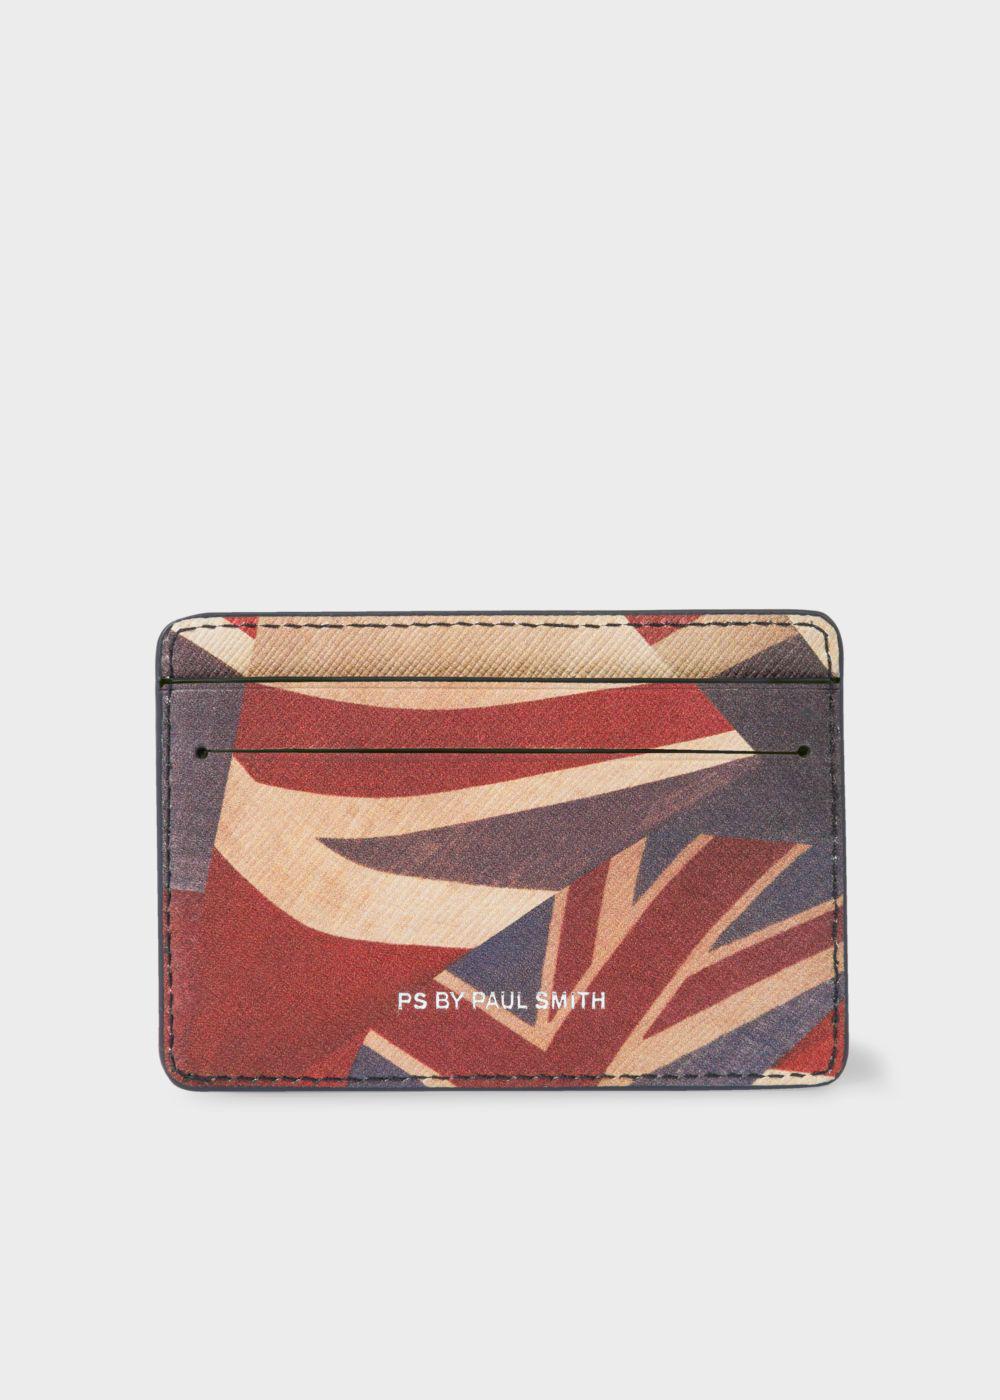 Paul Smith Men's Navy 'union Jack' Print Leather Credit Card Holder in Blue  for Men - Lyst